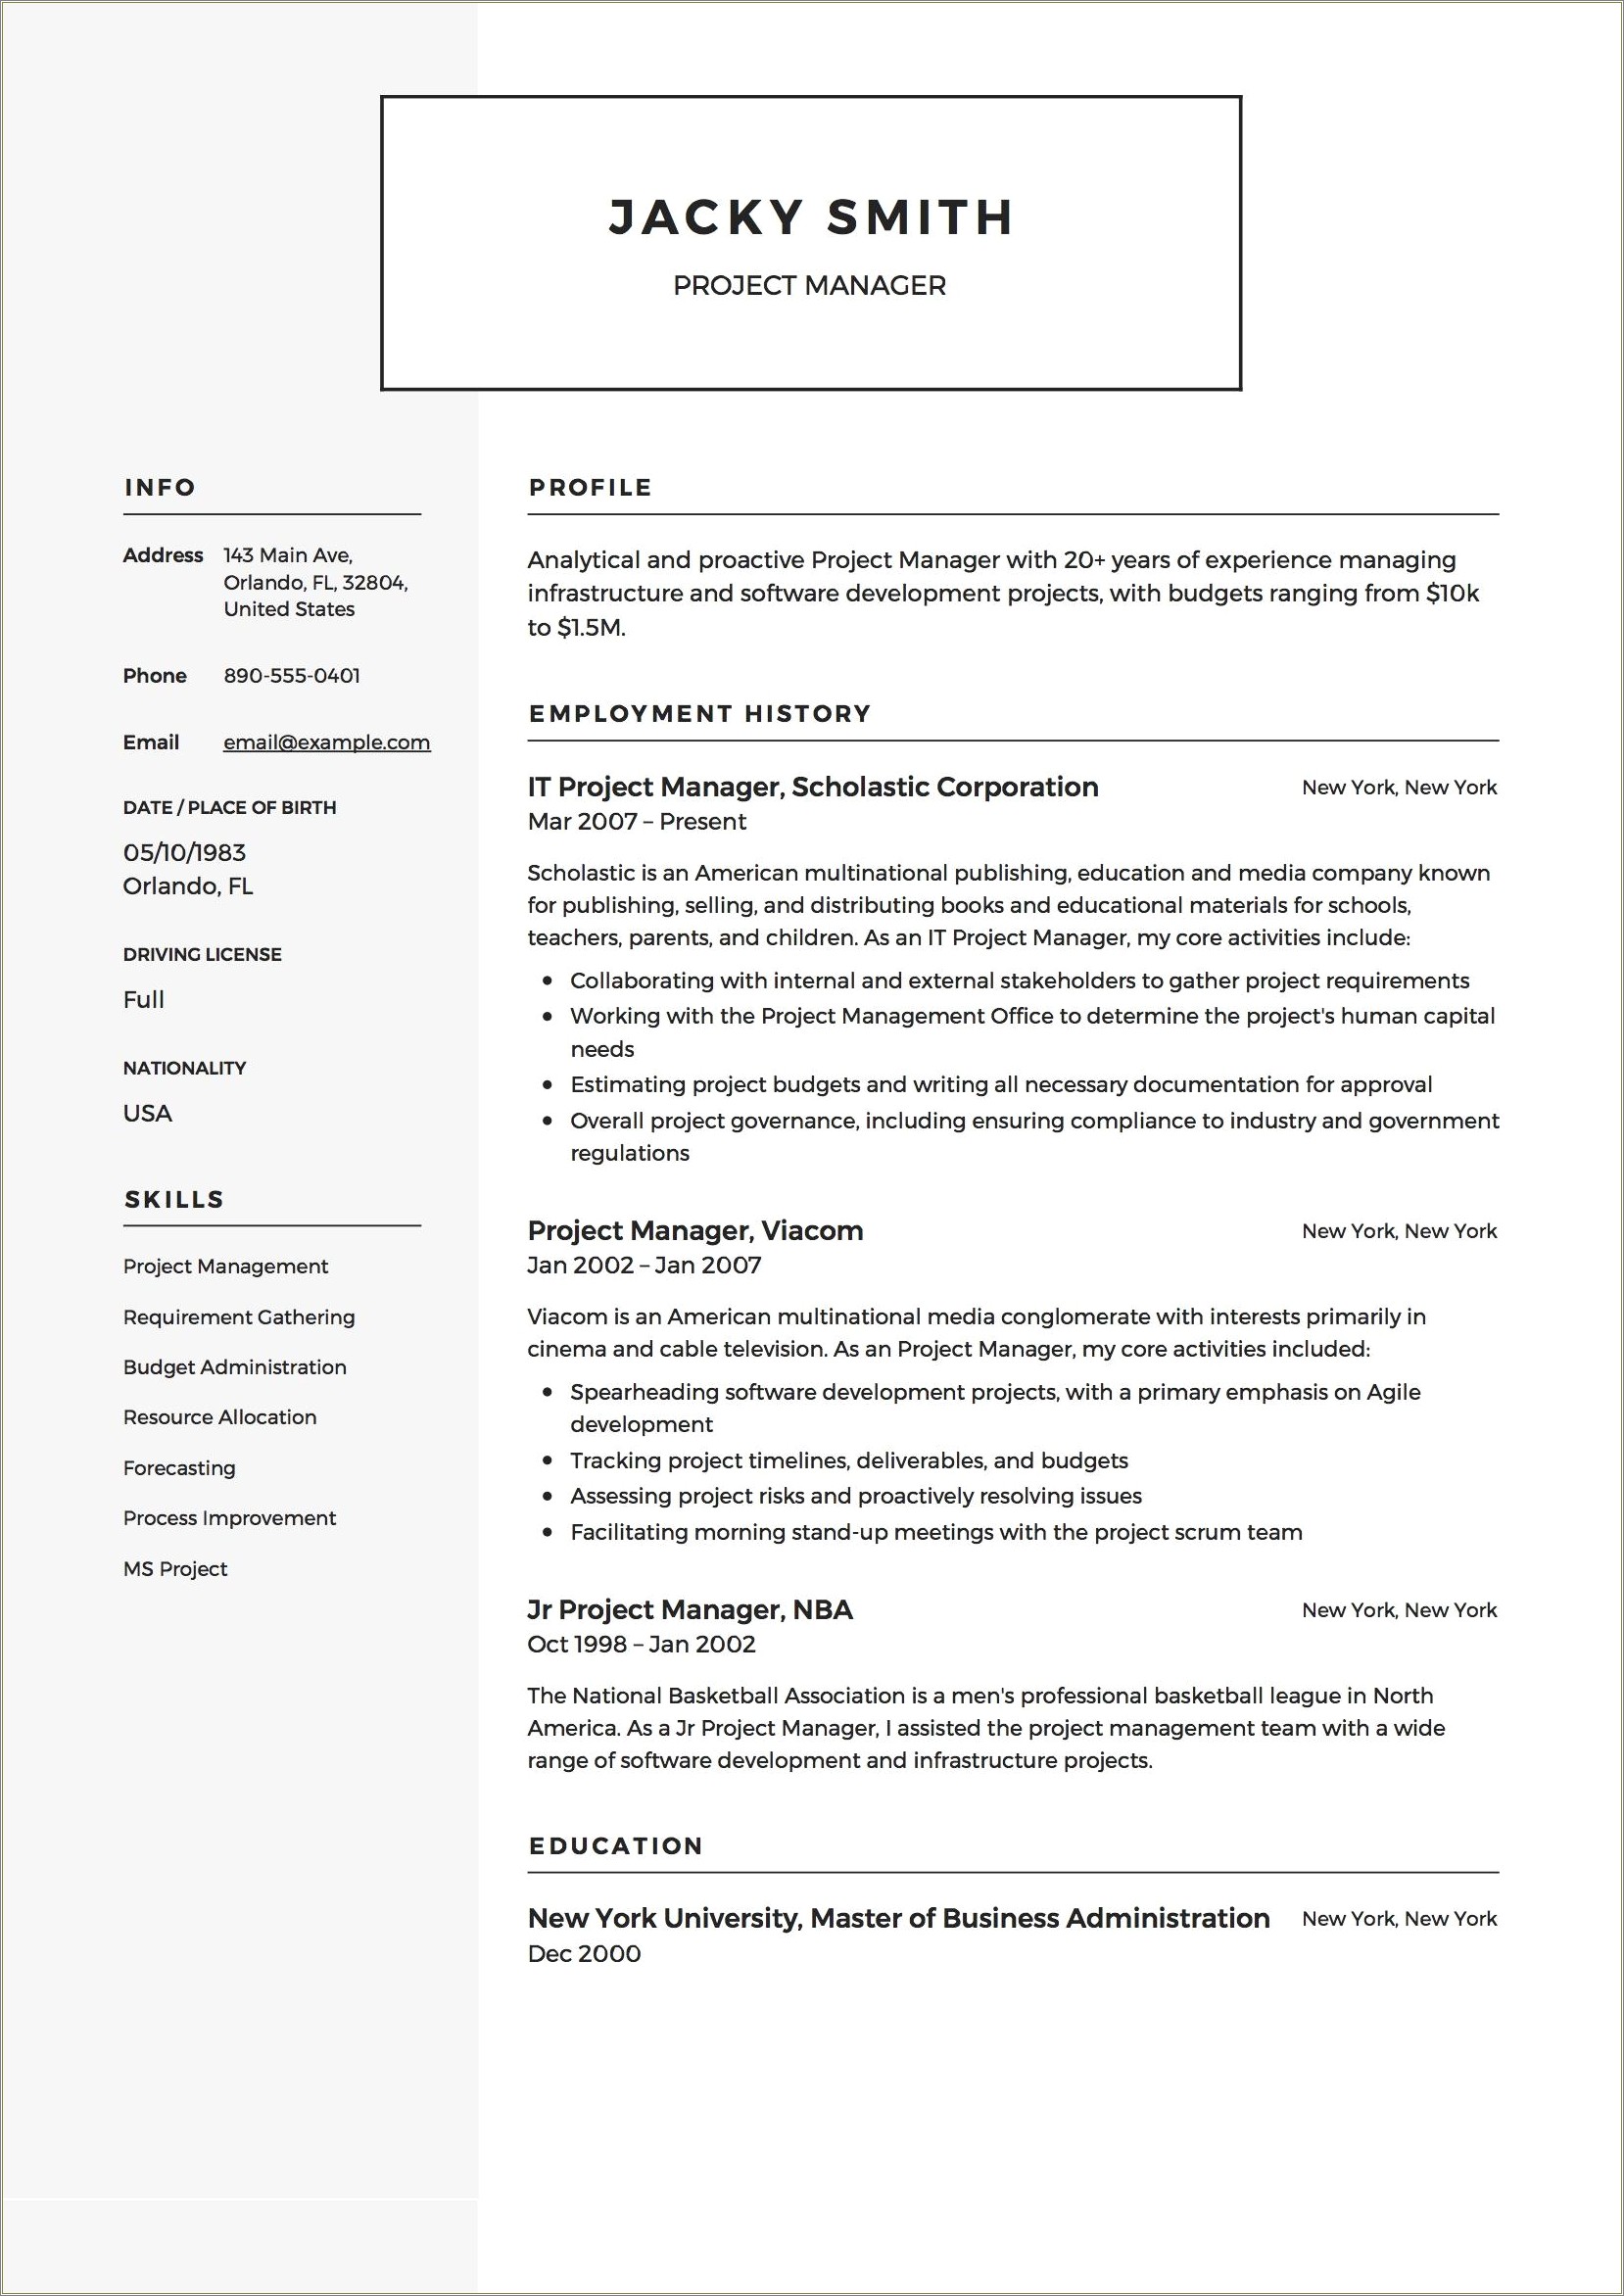 Objective Statement For Resume Construction Management